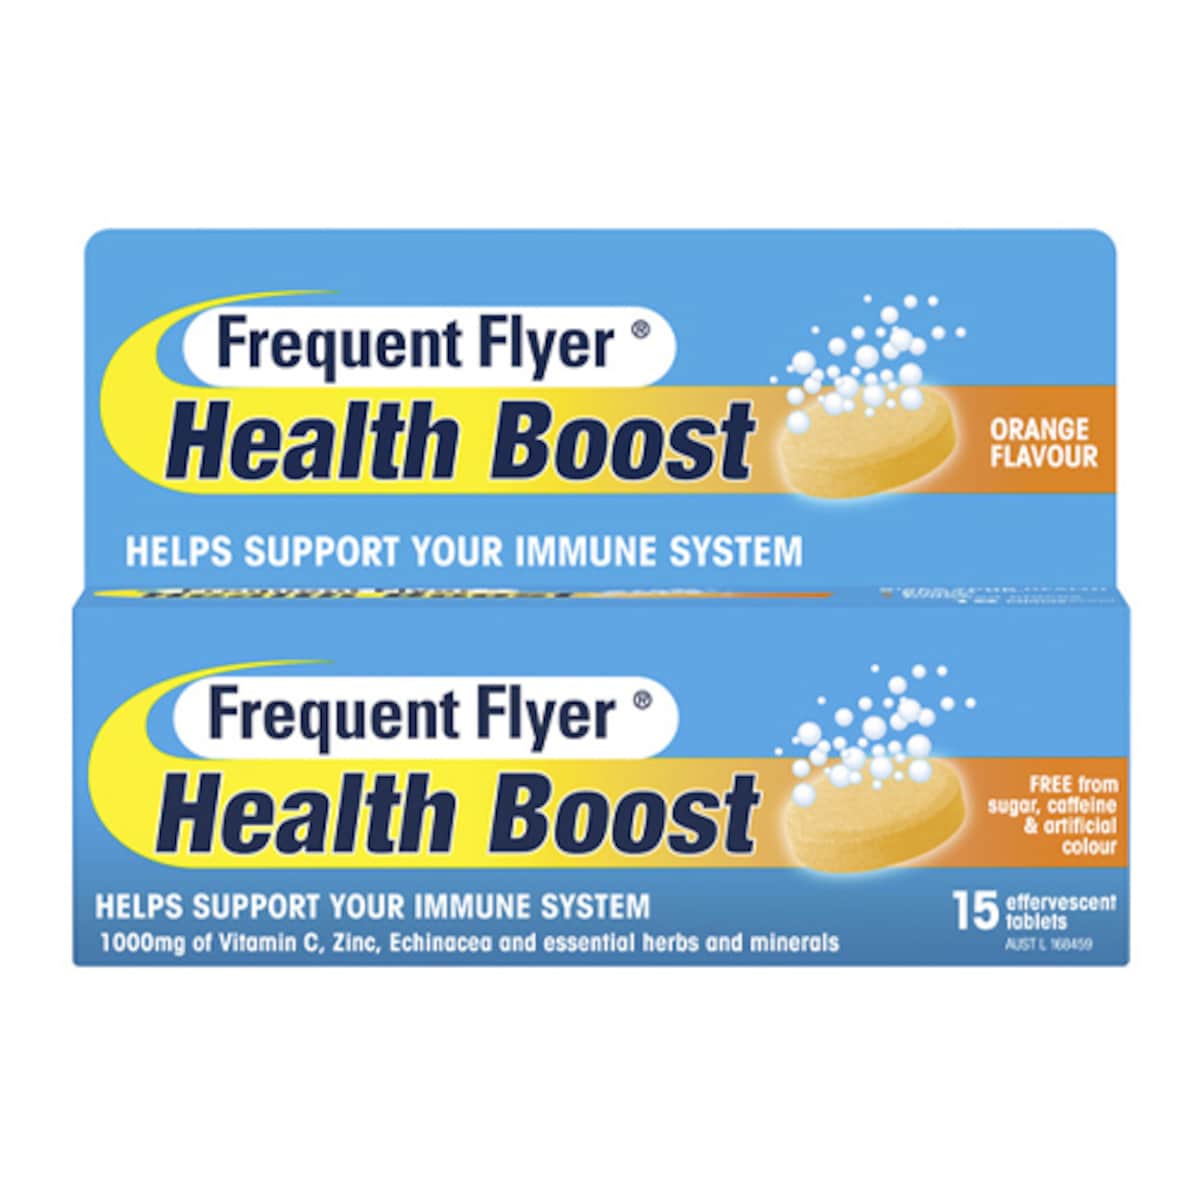 Frequent Flyer Health Boost 15 Effervescent Tablets